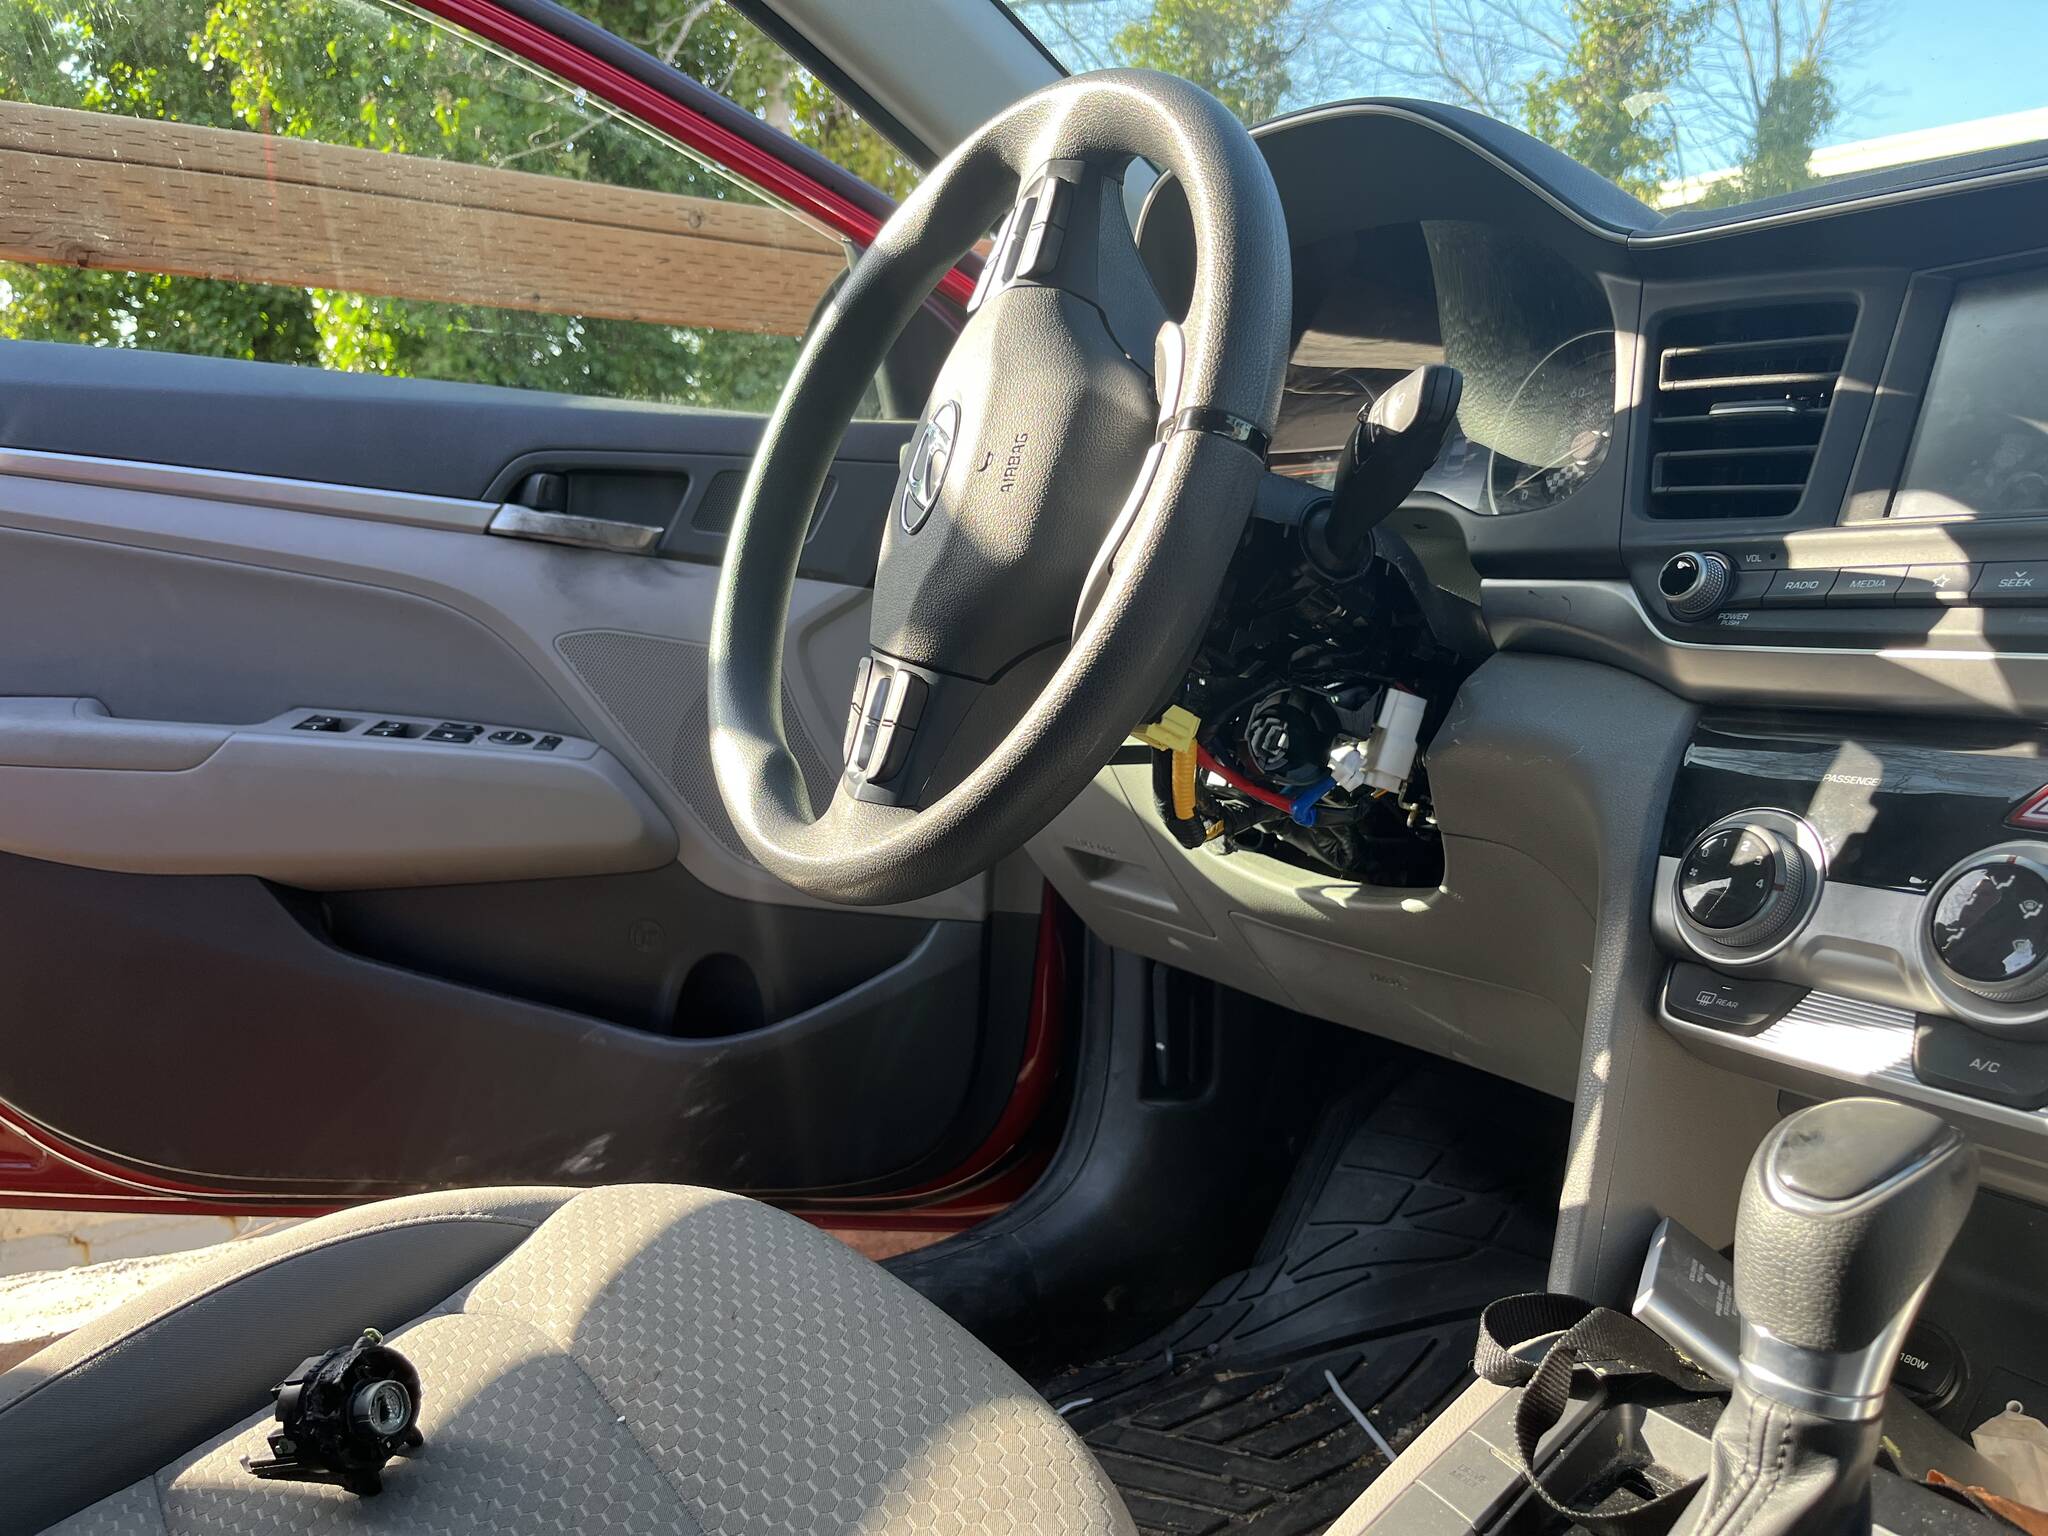 Thieves removed the steering wheel column cover and damaged the ignition lock of Doug Lindquist’s 2019 Hyundai Elantra. (Photo by Ben Leung/Renton Reporter)